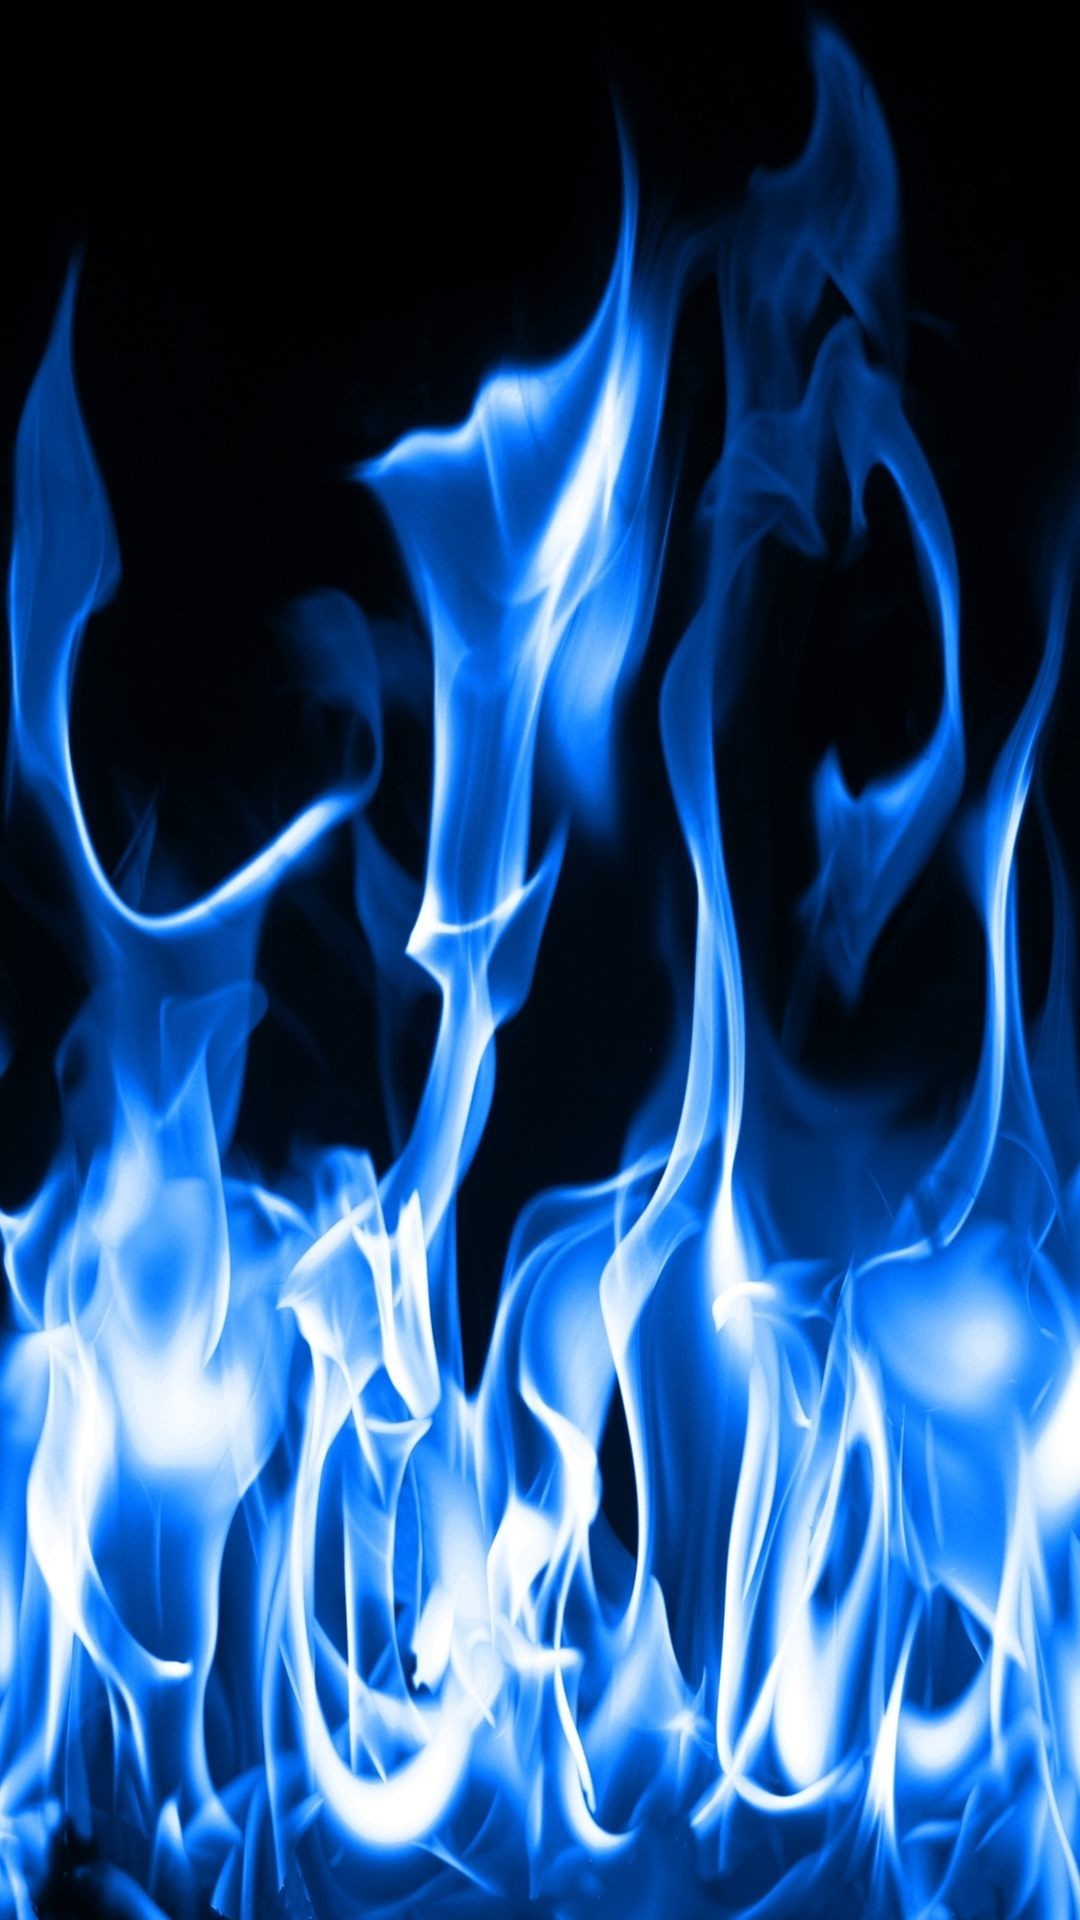 Abstract Flames iPhone 6 Plus Wallpapers – blue, fire iPhone 6